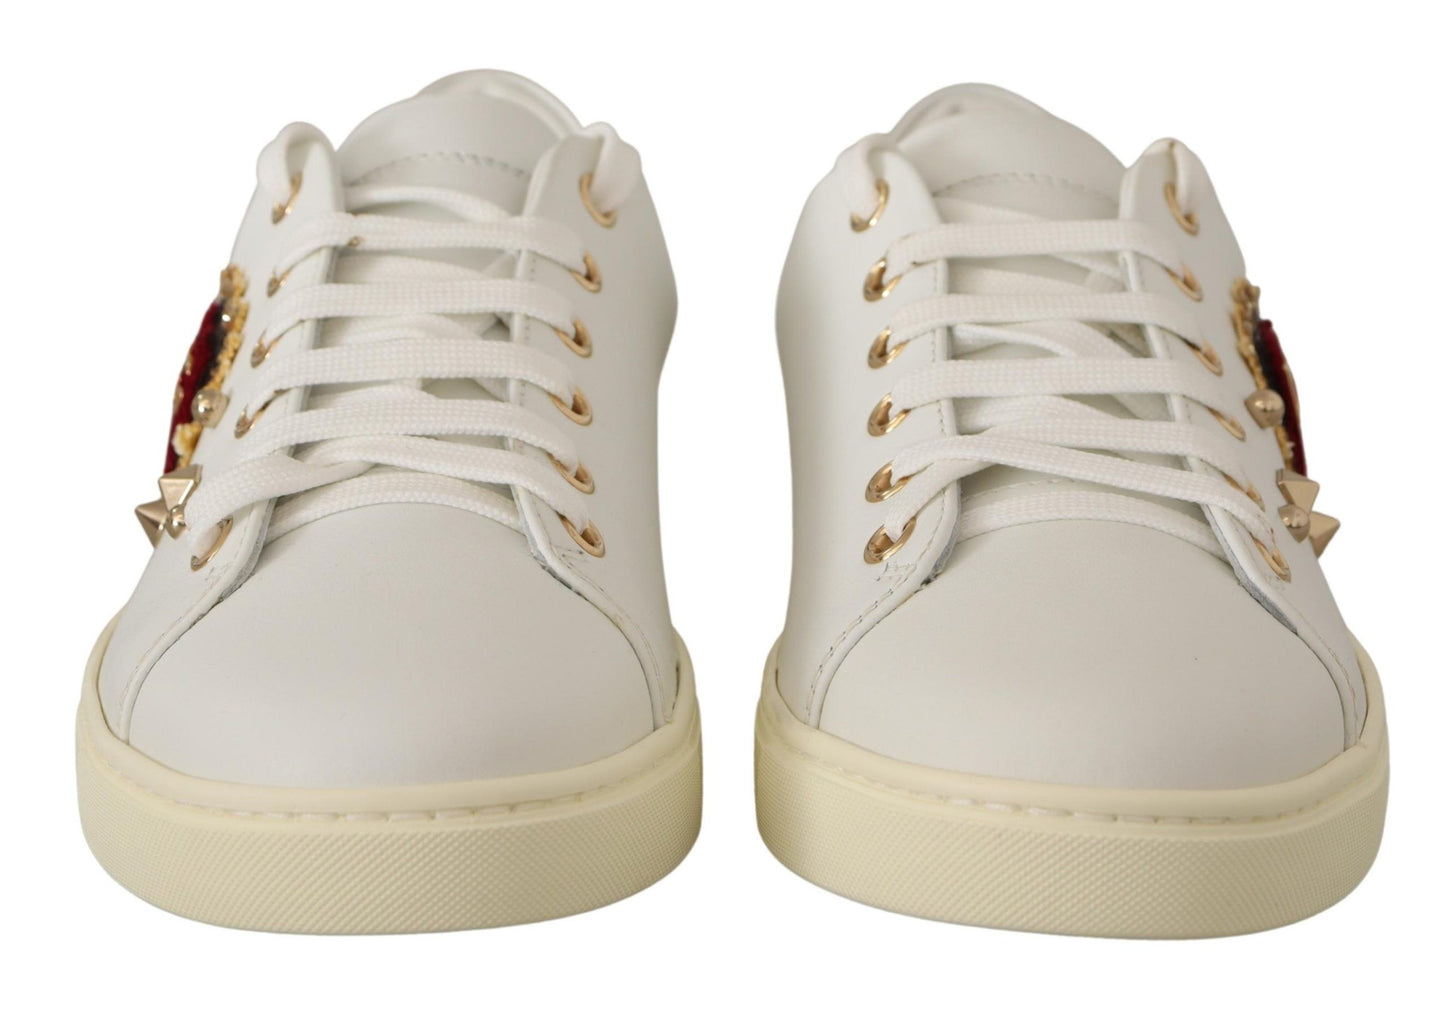 Chic White Sneakers with Gold Studs and Heart Detail